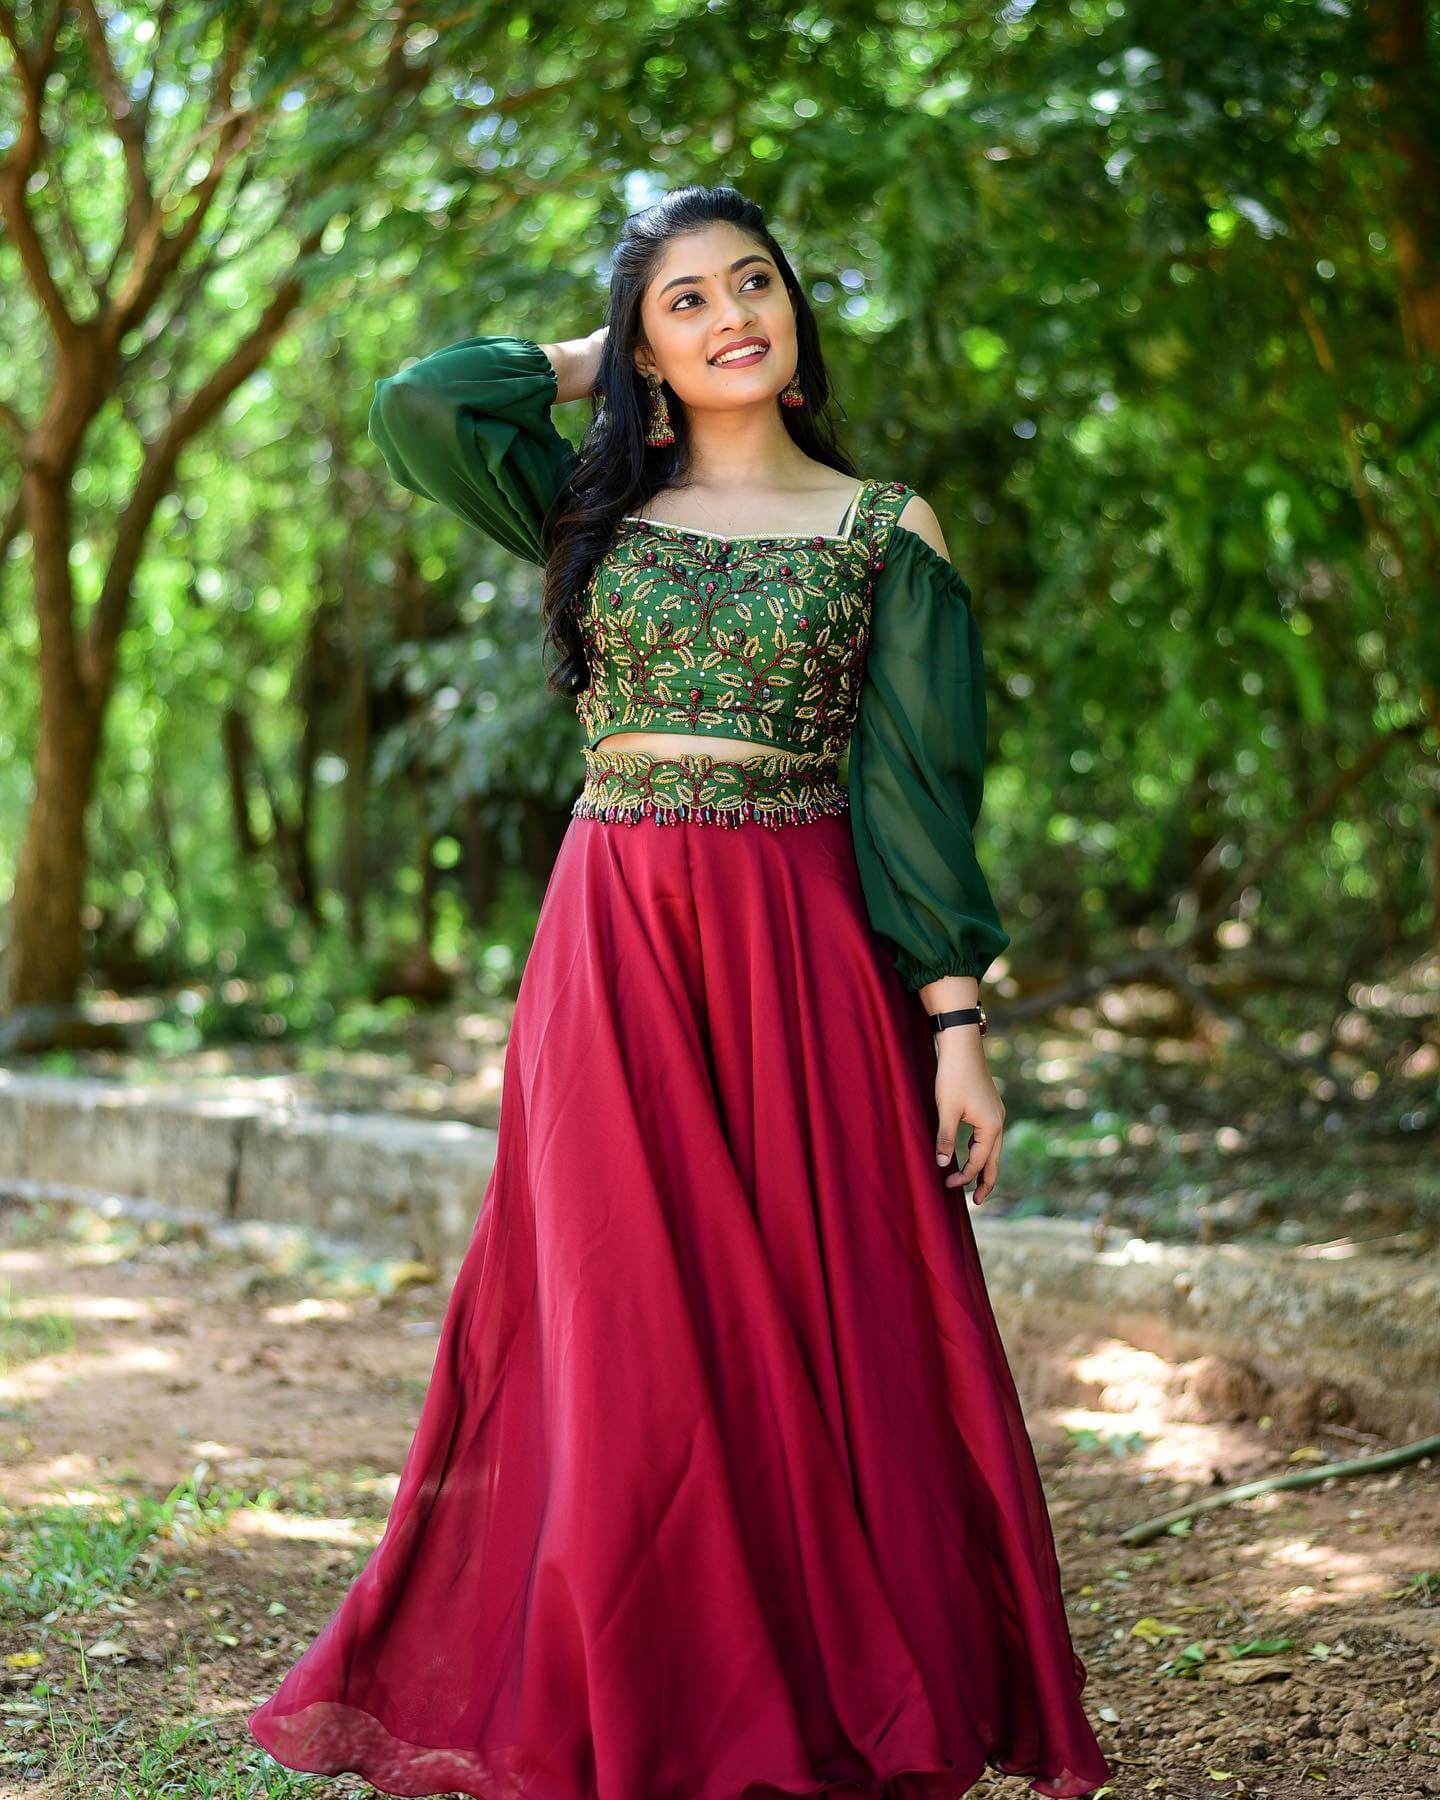 Ammu Abhirami Mesmerises With Her Look In Maroon Skirt With Green Sweet Heart Neckline Embroidered Blouse